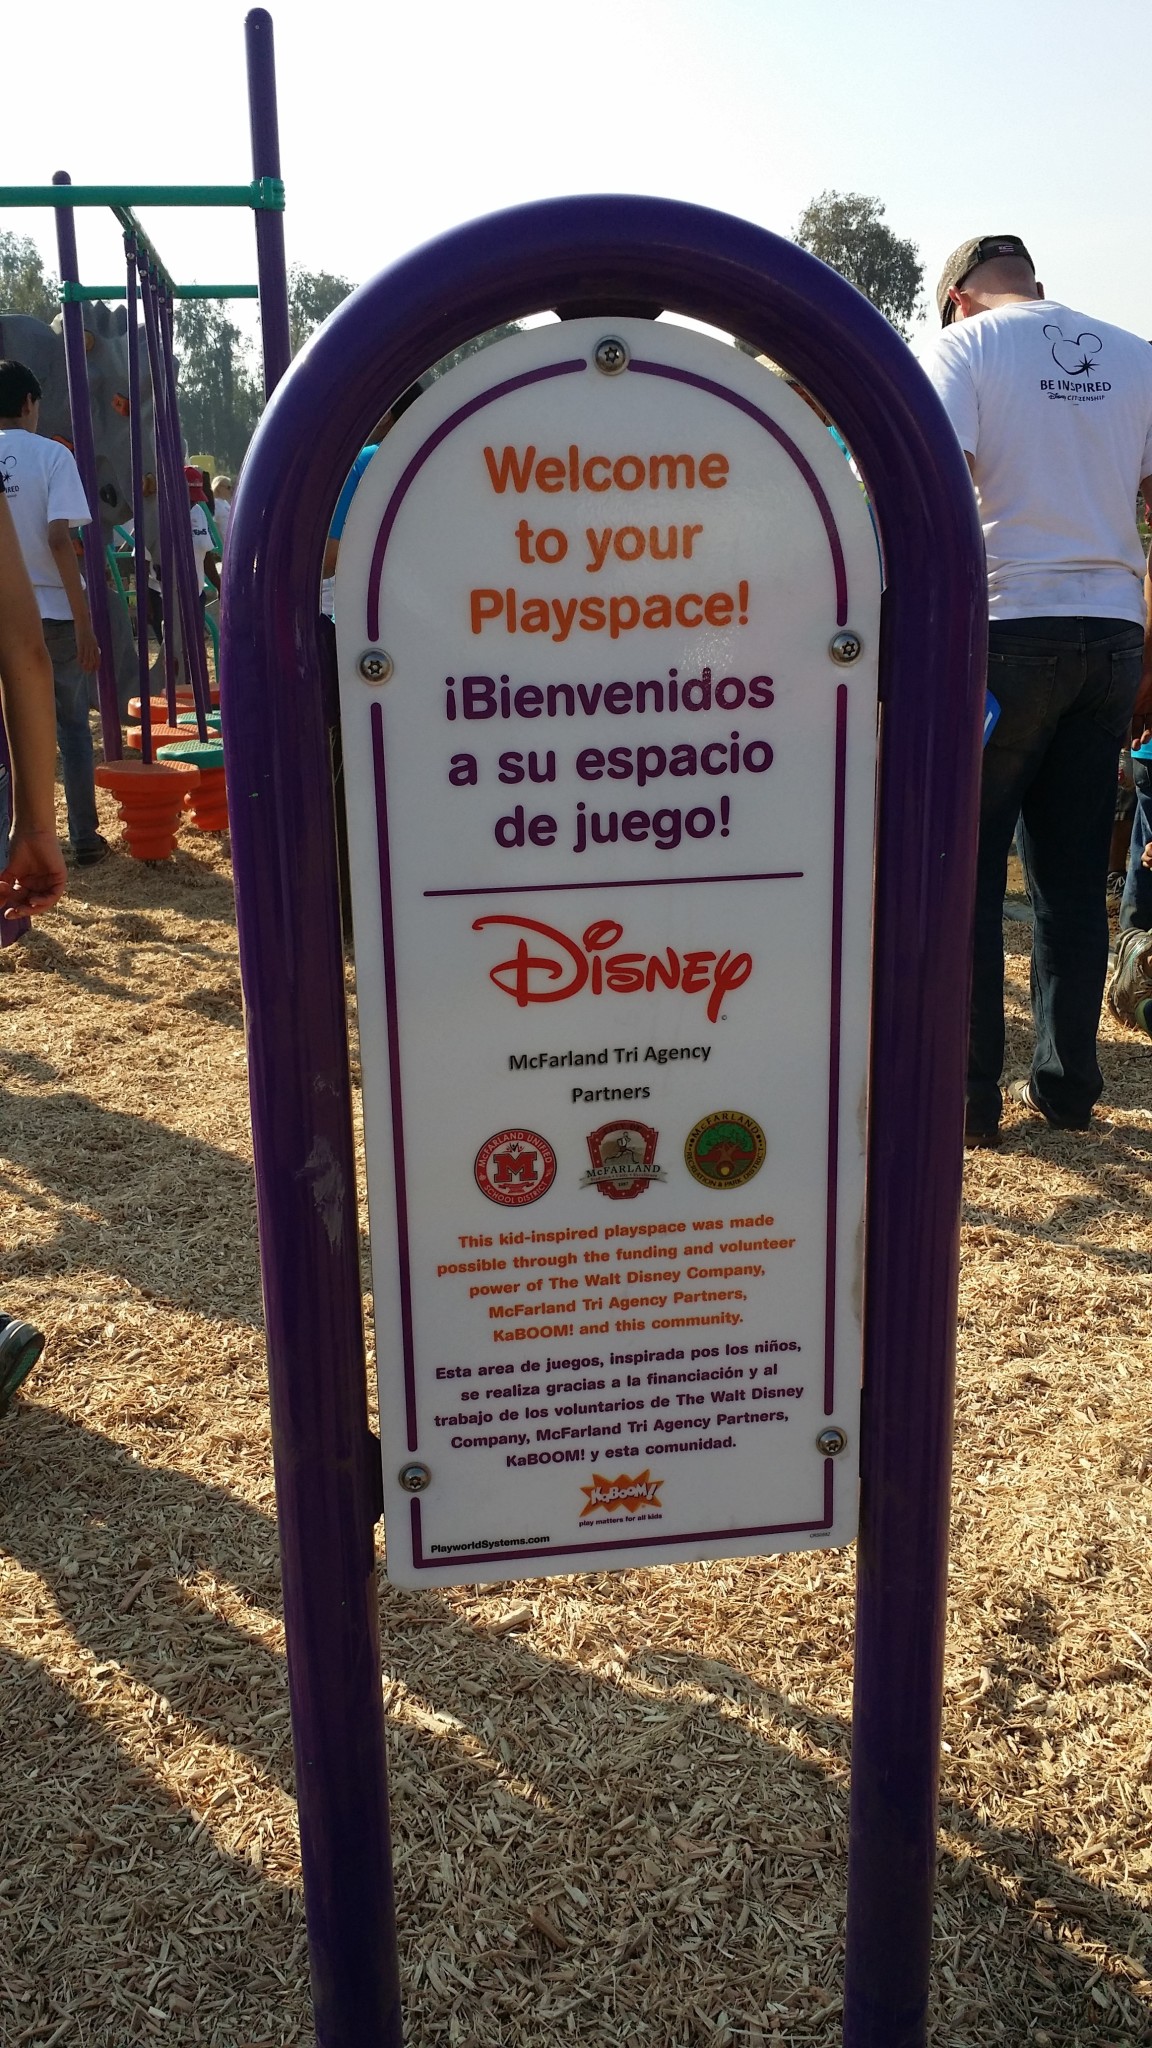 Disney joins forces with McFarland community to build playground.